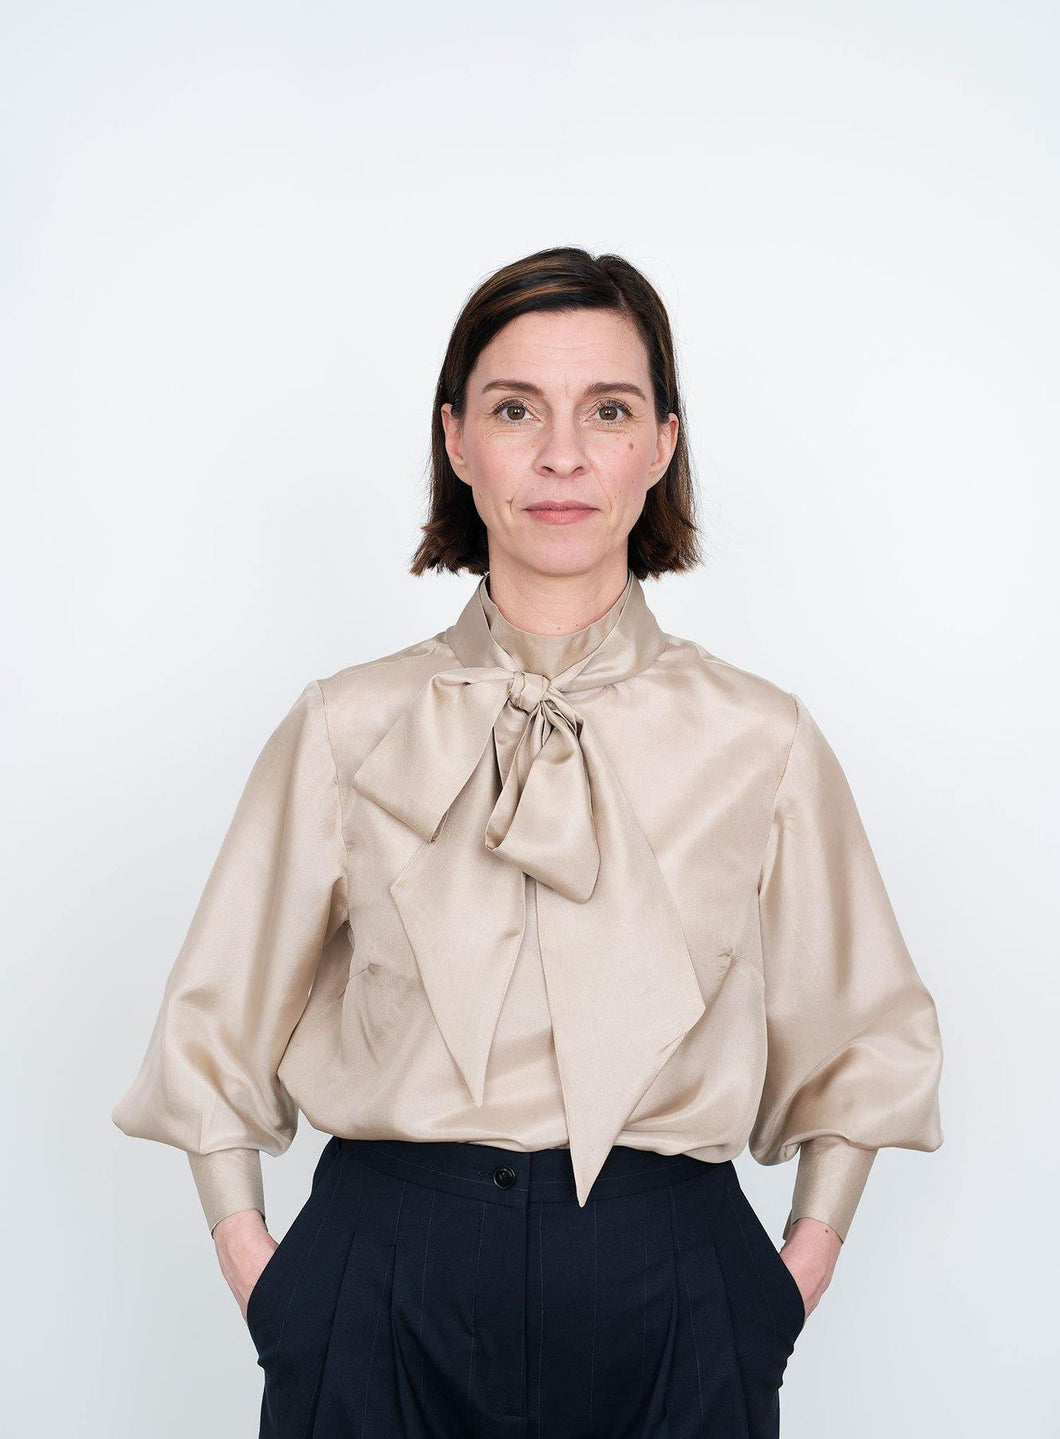 Tie Bow Blouse by The Assembly Line